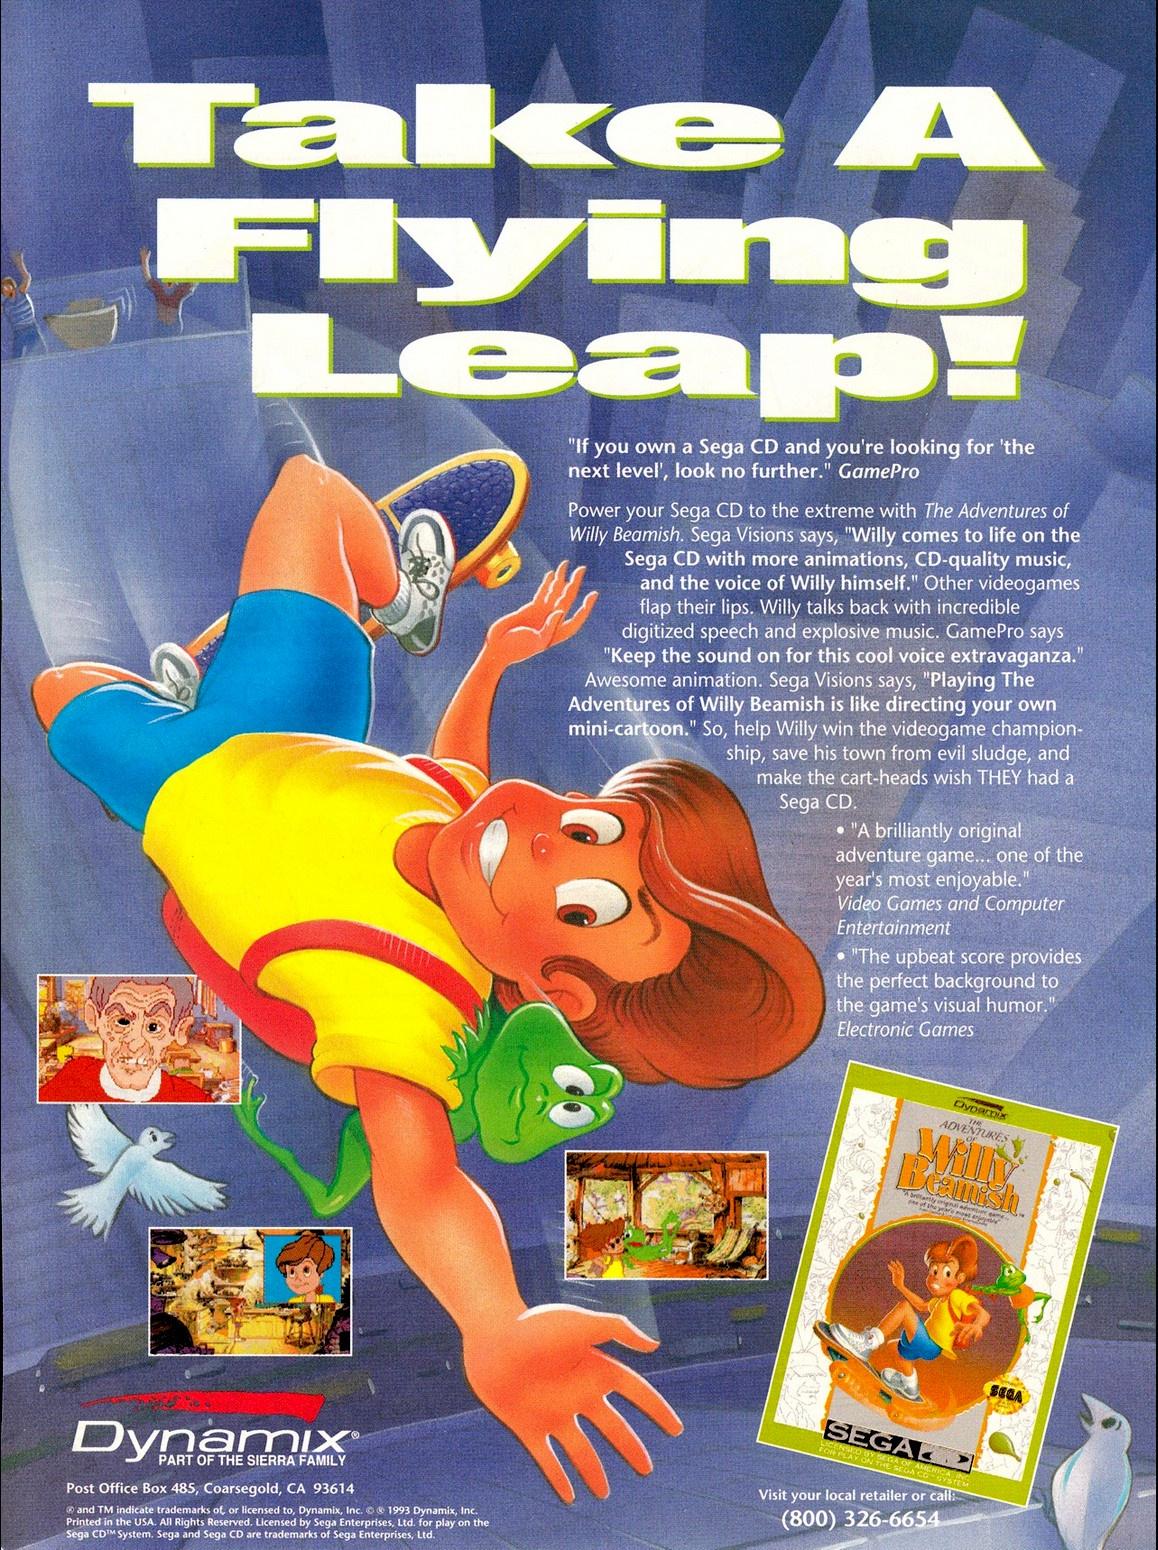 The Adventures of Willy Beamish – videogames advert within the early ’90s (Amiga, Mac, PC, Sega CD)